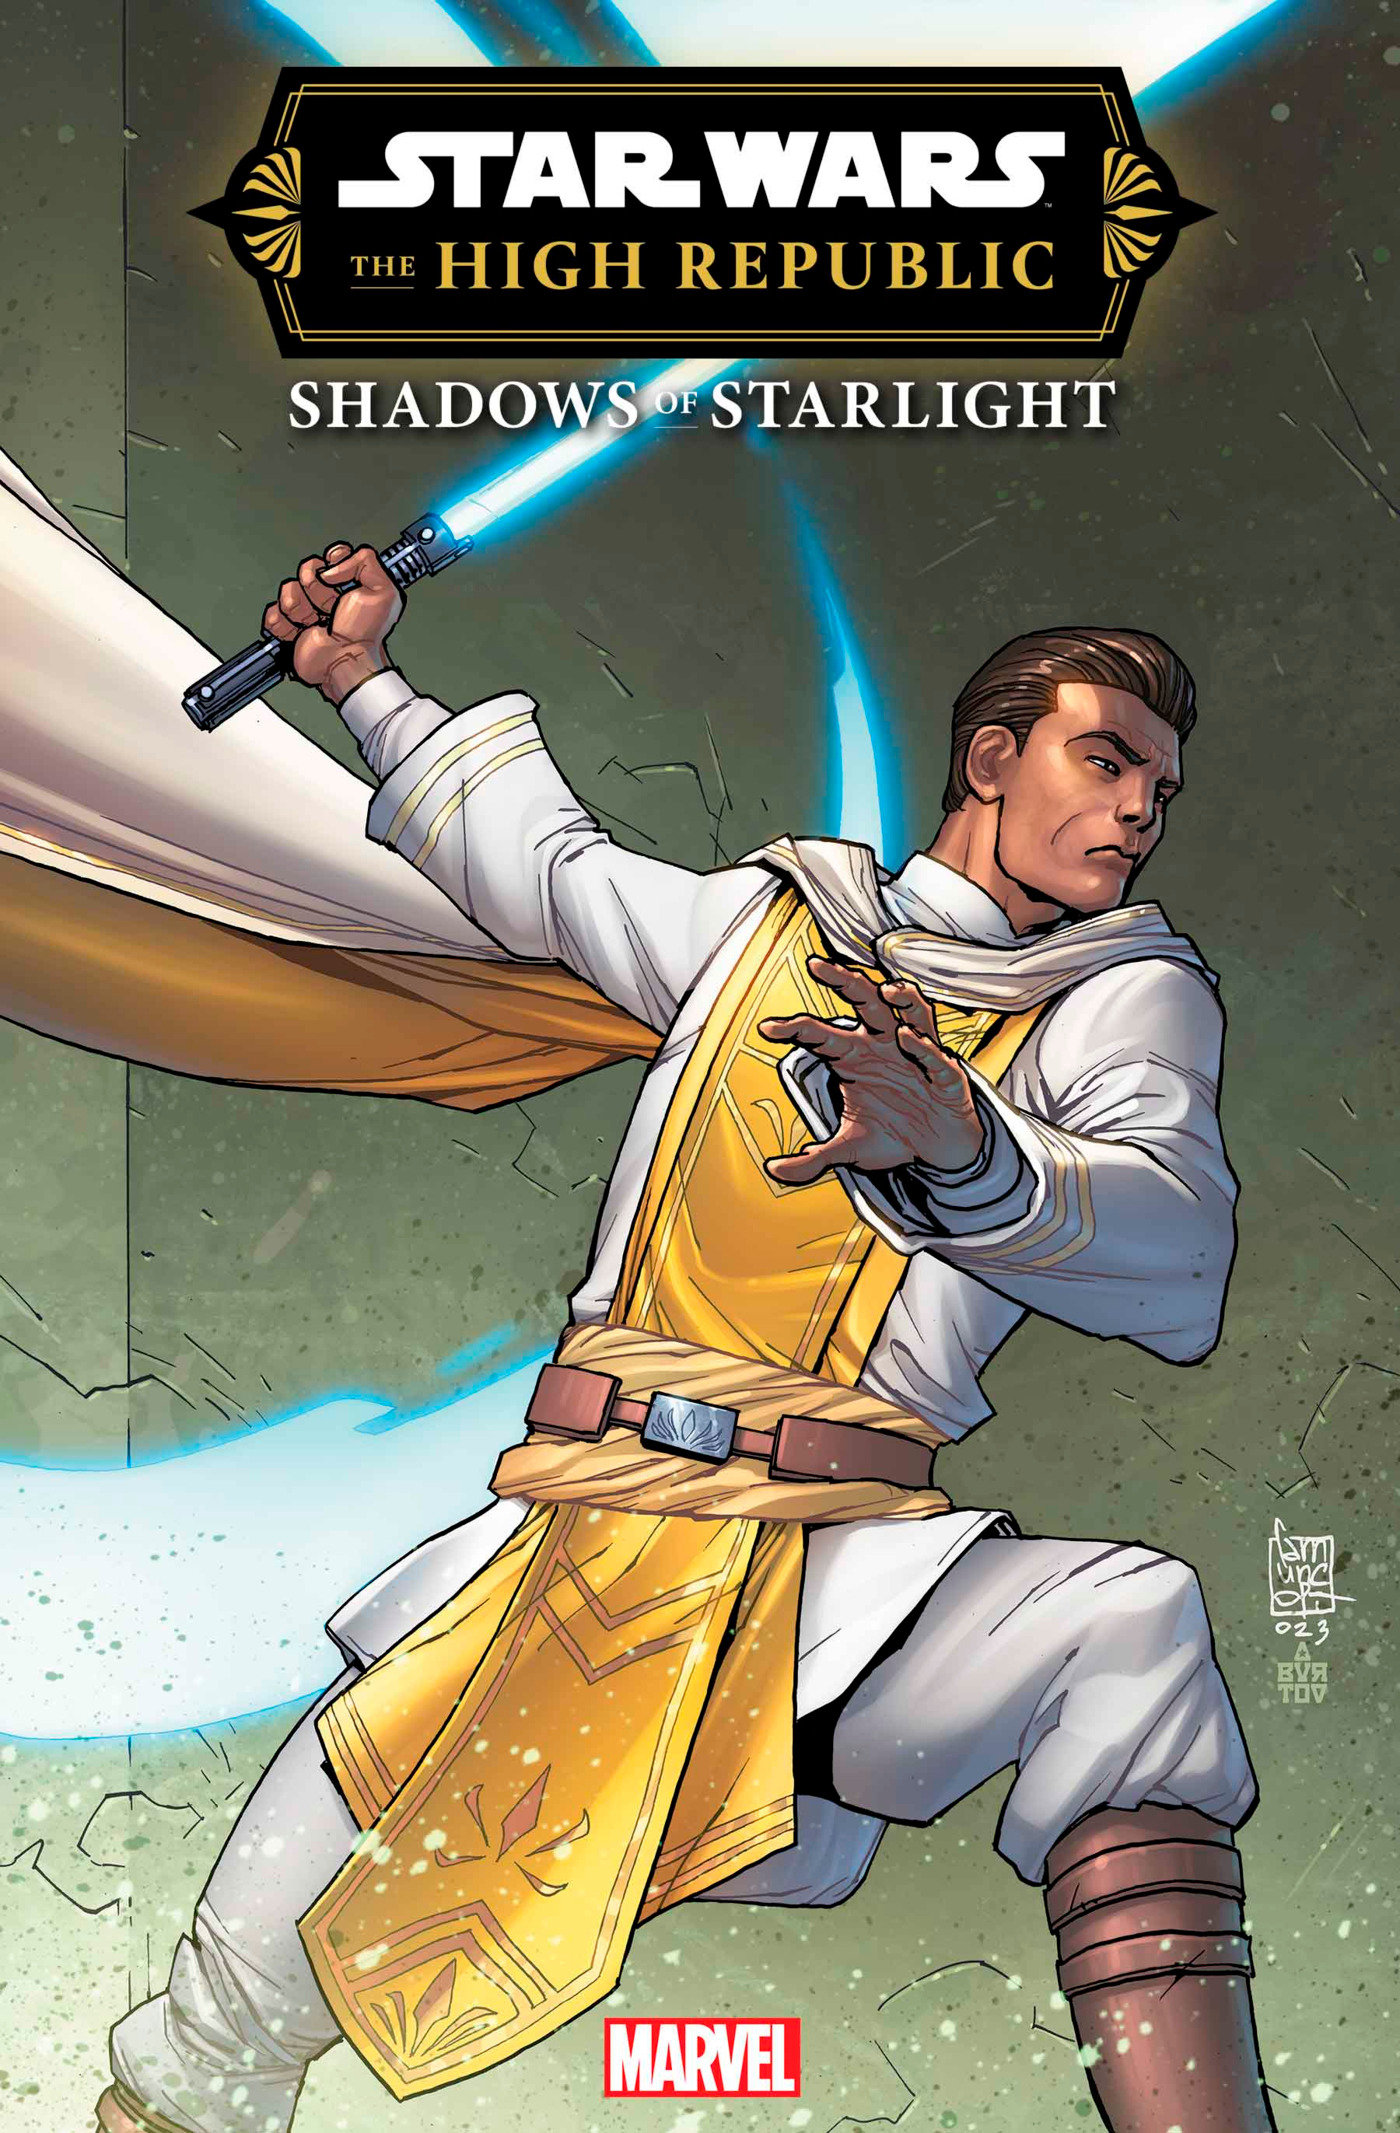 Star Wars: The High Republic - Shadows of Starlight #2 Giuseppe Camuncoli Variant 1 for 25 Incentive